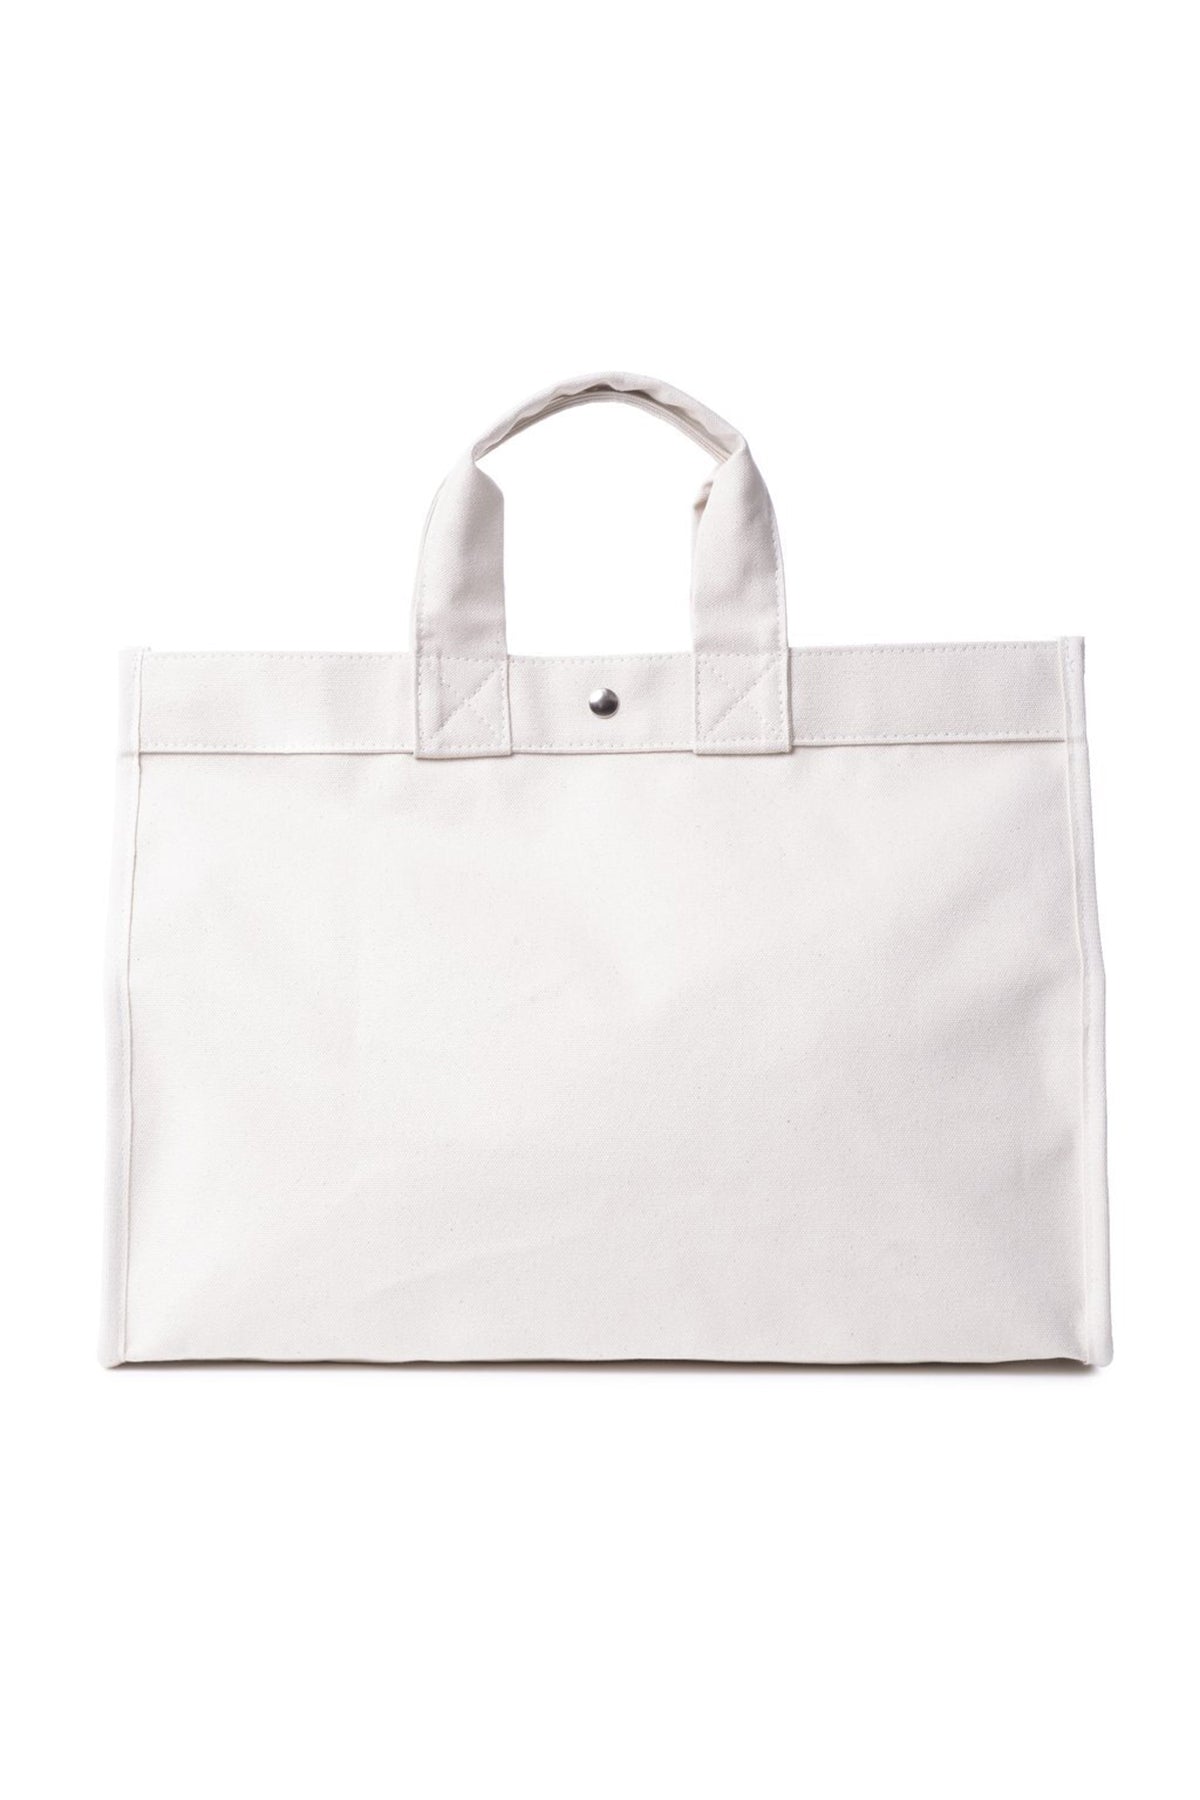 a CLASSIC FIELD BAG BY UTILITY CANVAS on a white background.-17386780655809